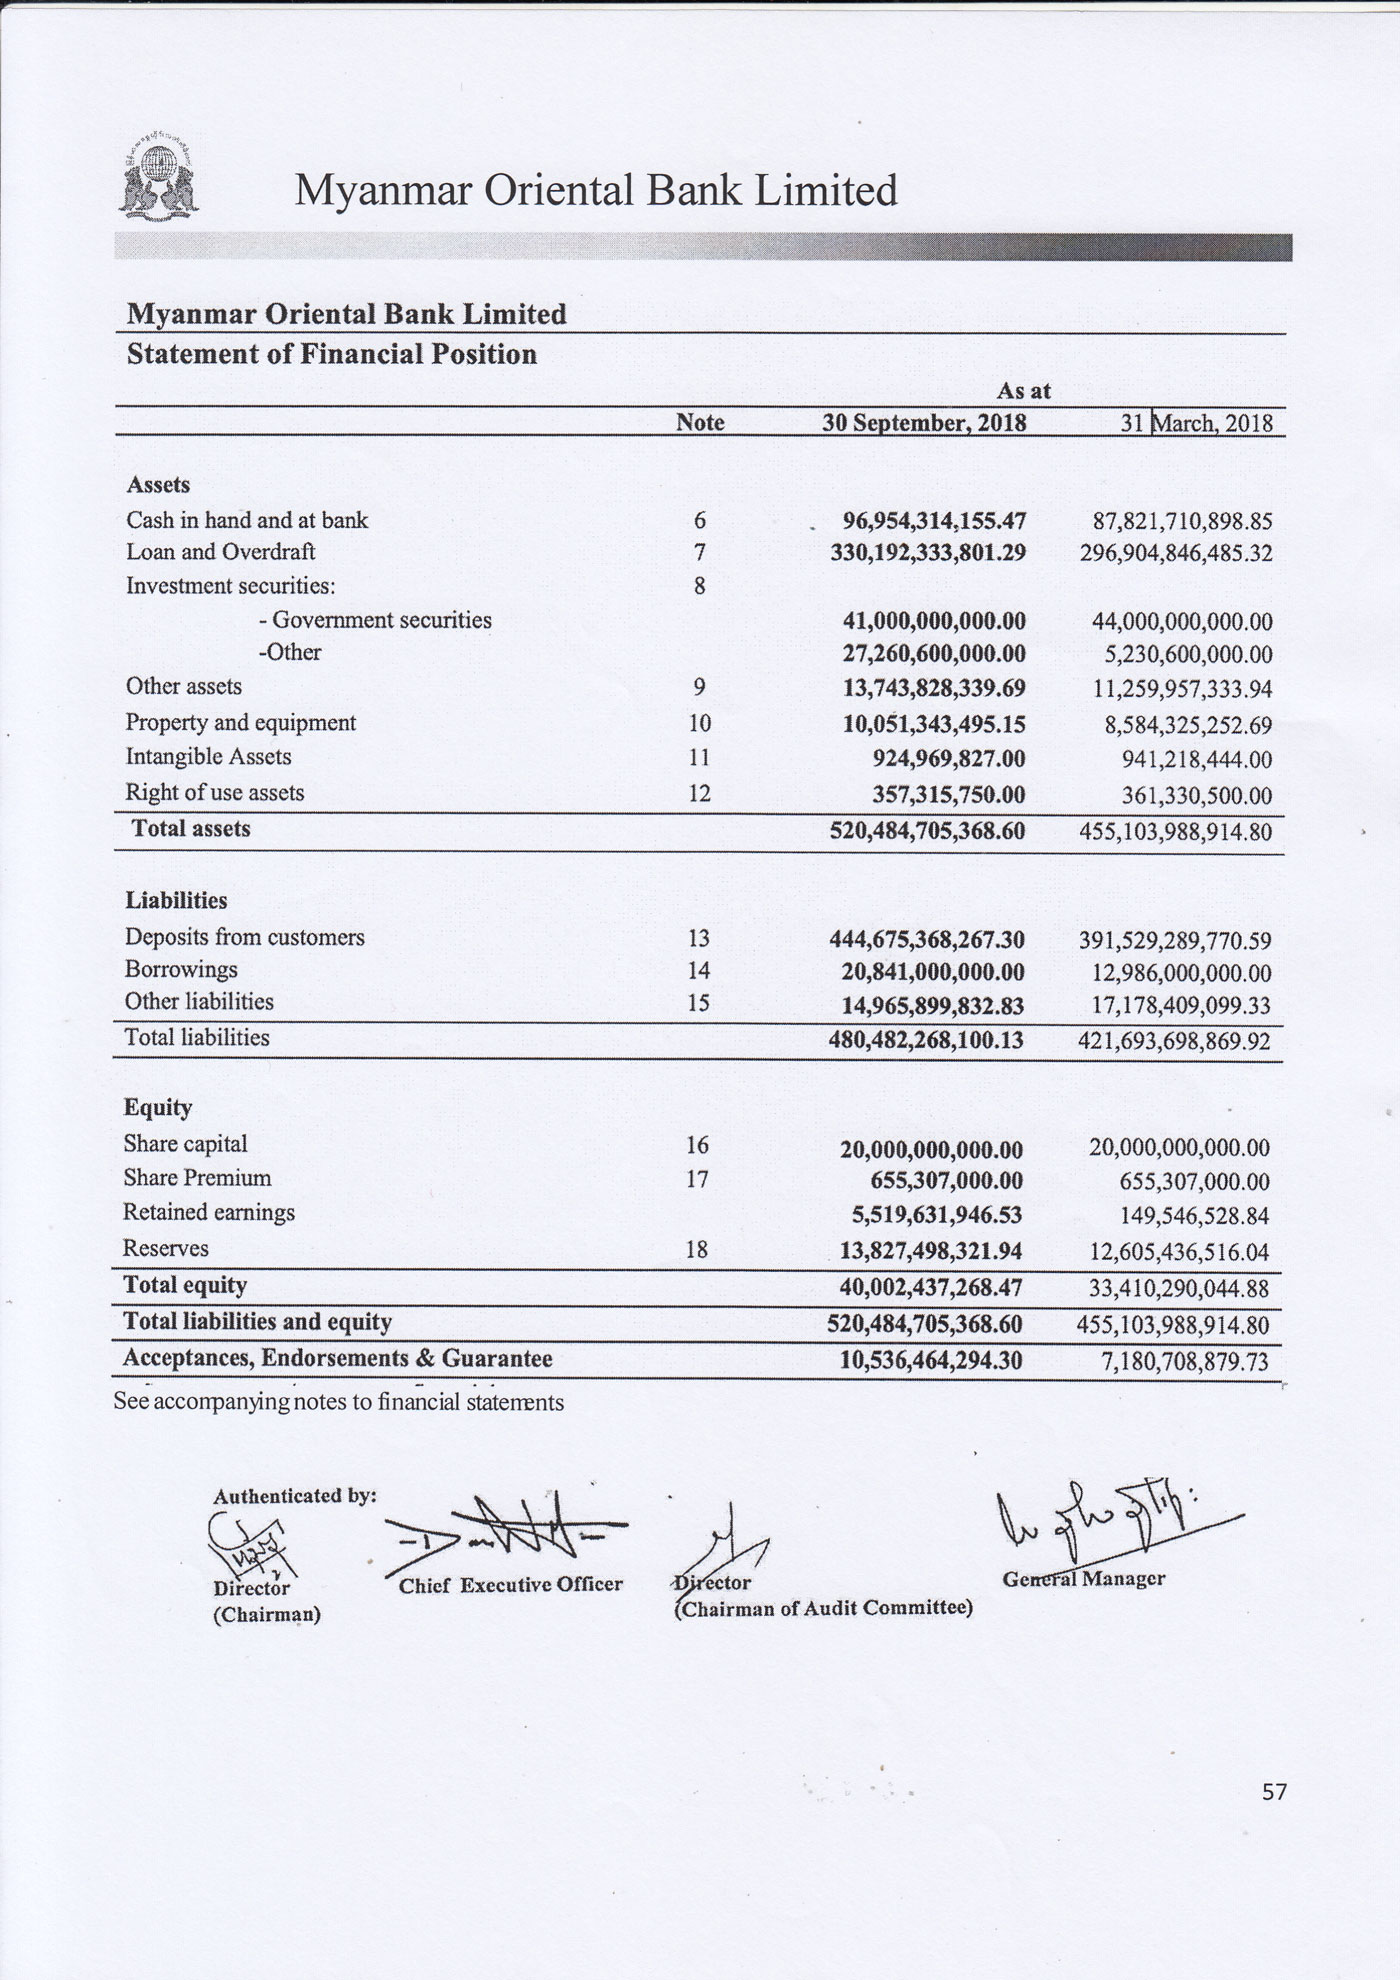 2018 (31/March to 30/September ) Financial Statement